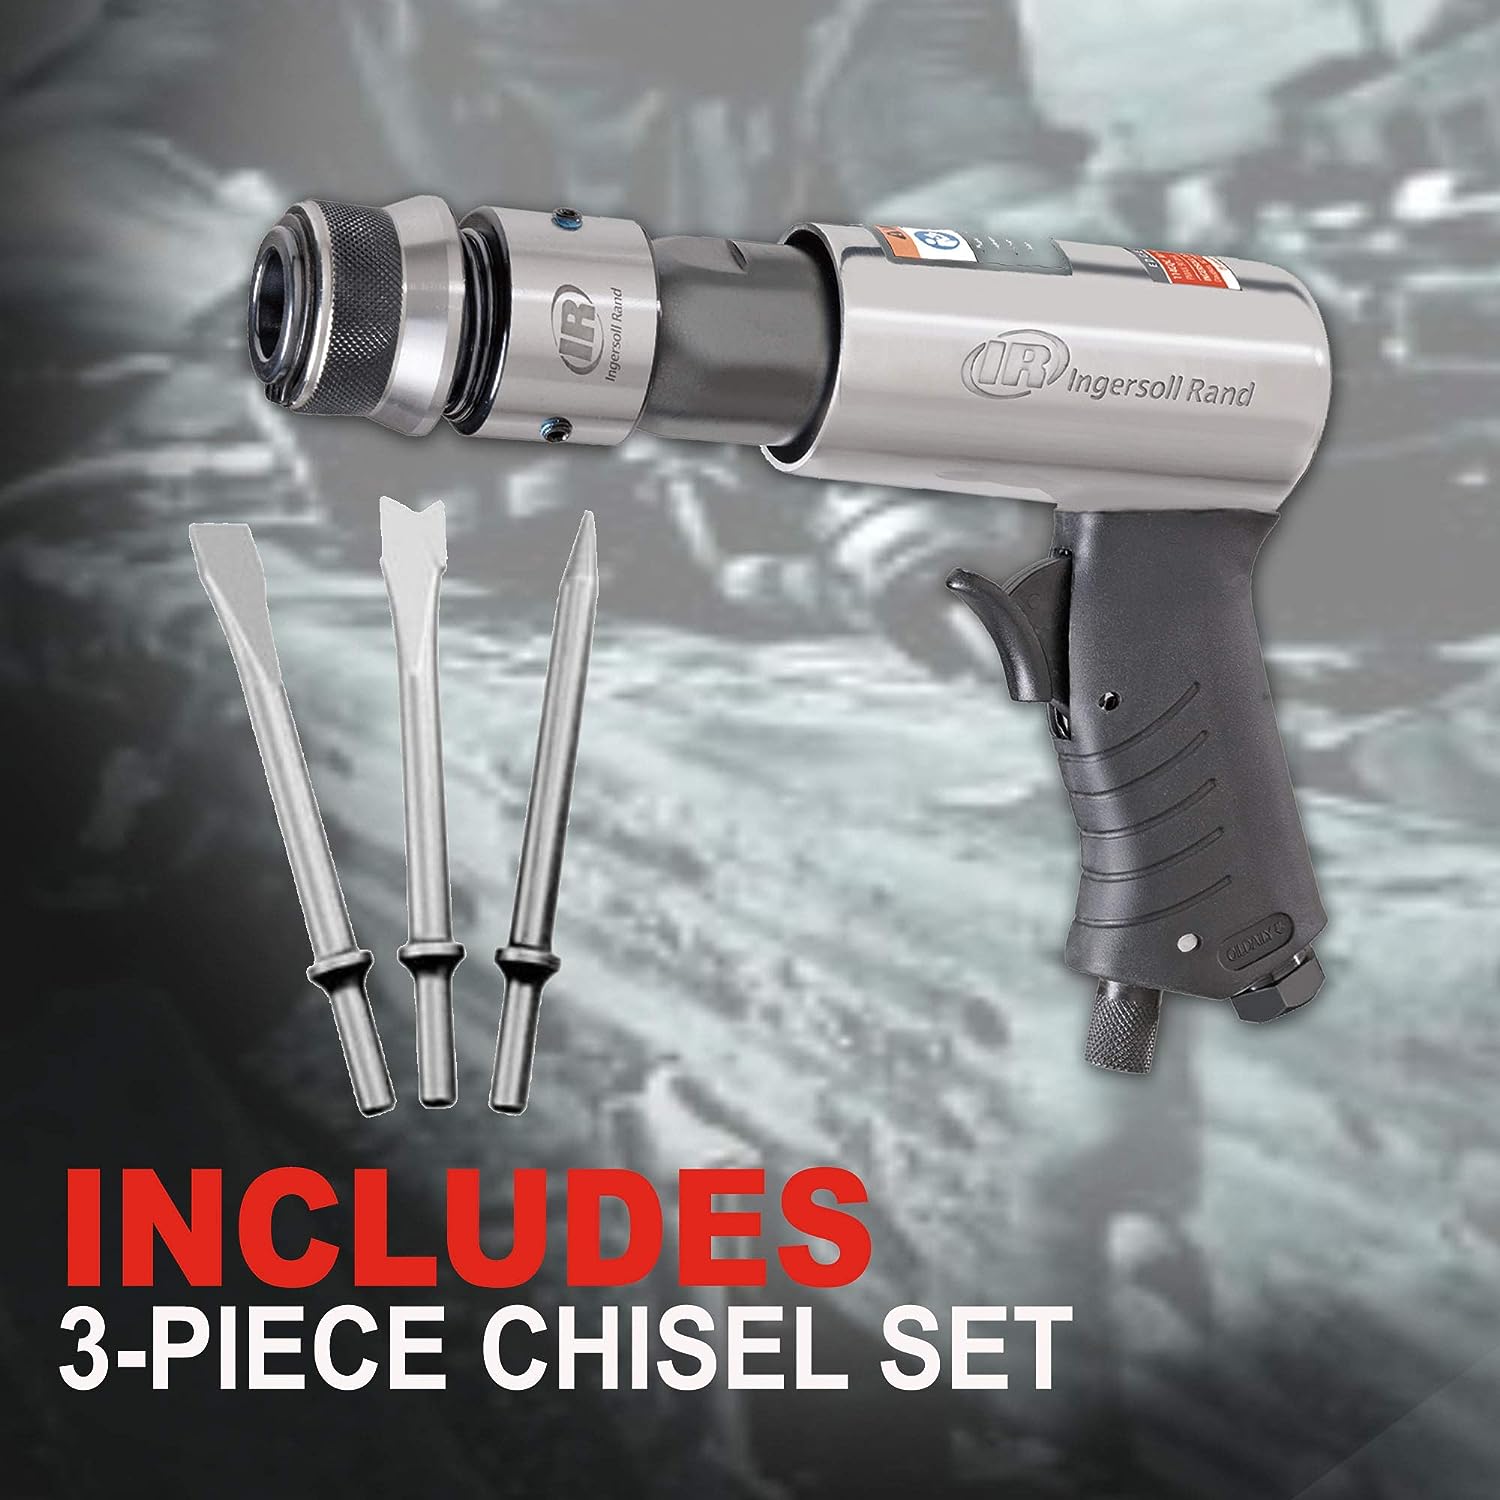 Ingersoll Rand 114GQC Air Hammer - 3 PC Chisel Set with Tapered Punch, Panel Cutter, Flat Chisel, 2-5/8 Inch stroke, 3500 BPM, Lightweight, Compact, Gray